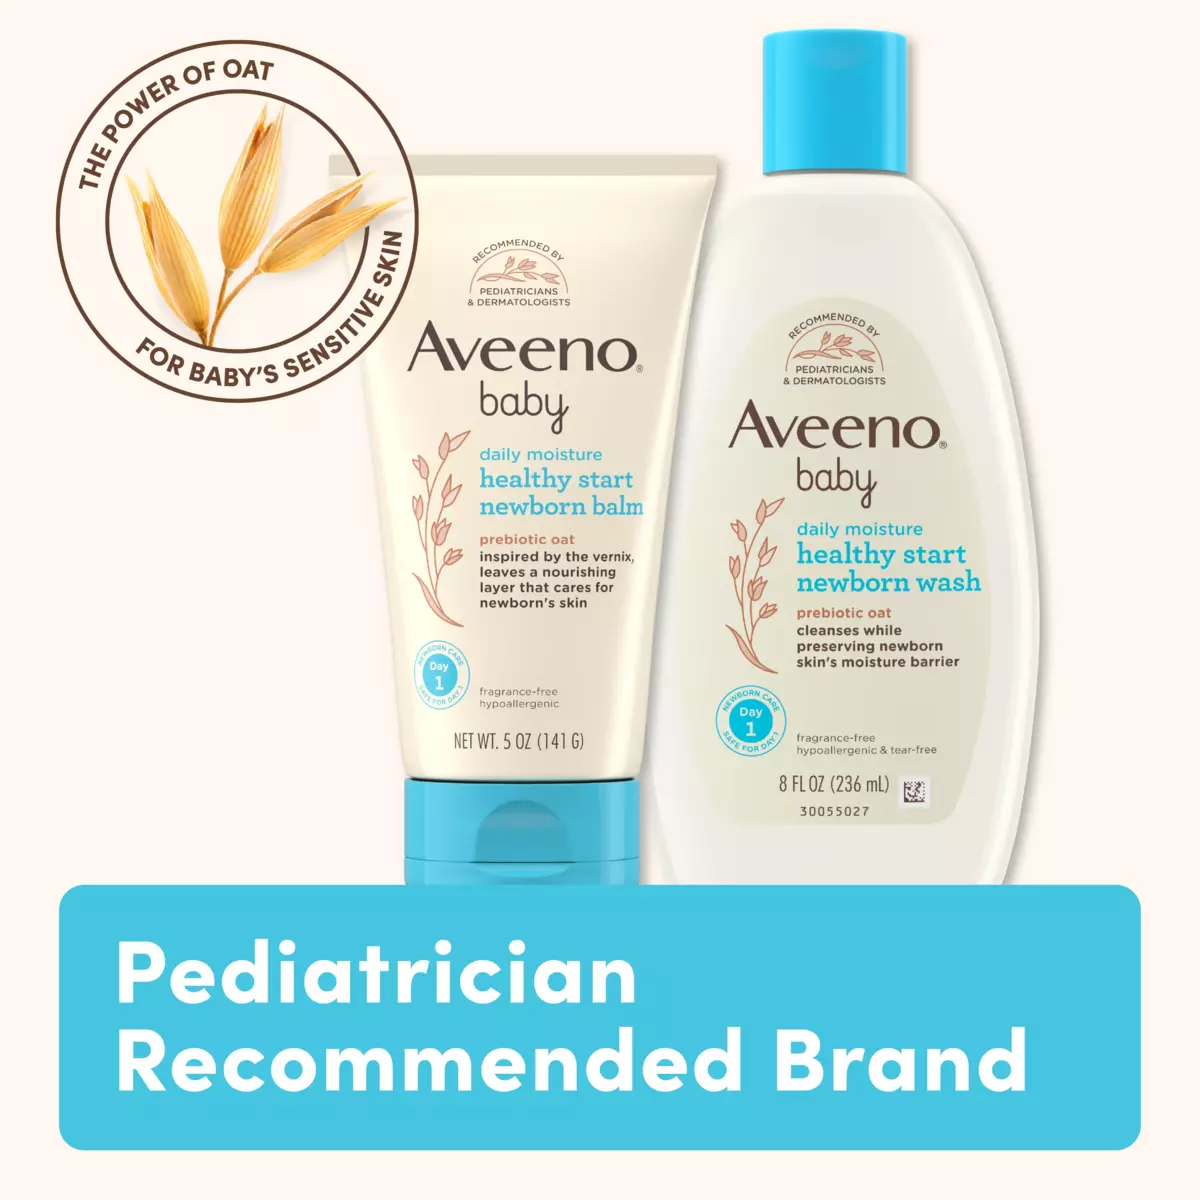 Aveeno Healthy Start Balm and Aveeno Healthy Start Wash side by side highlighting Aveeno is a pediatrician recommended brand